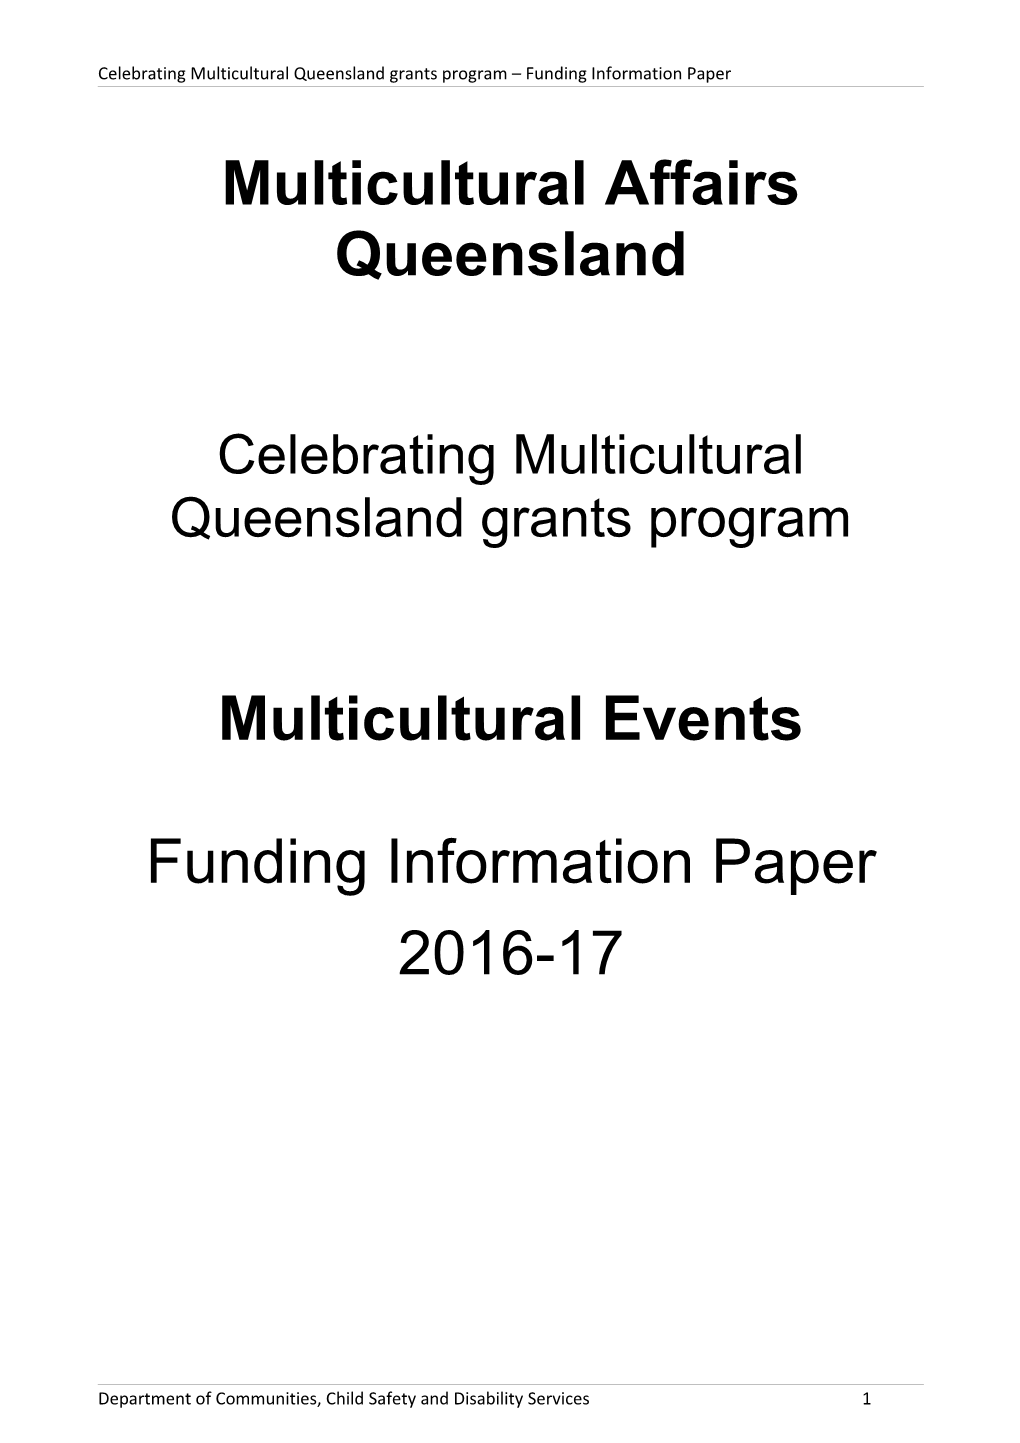 2016-17 CMQ Funding Information Paper - Multicultural Events